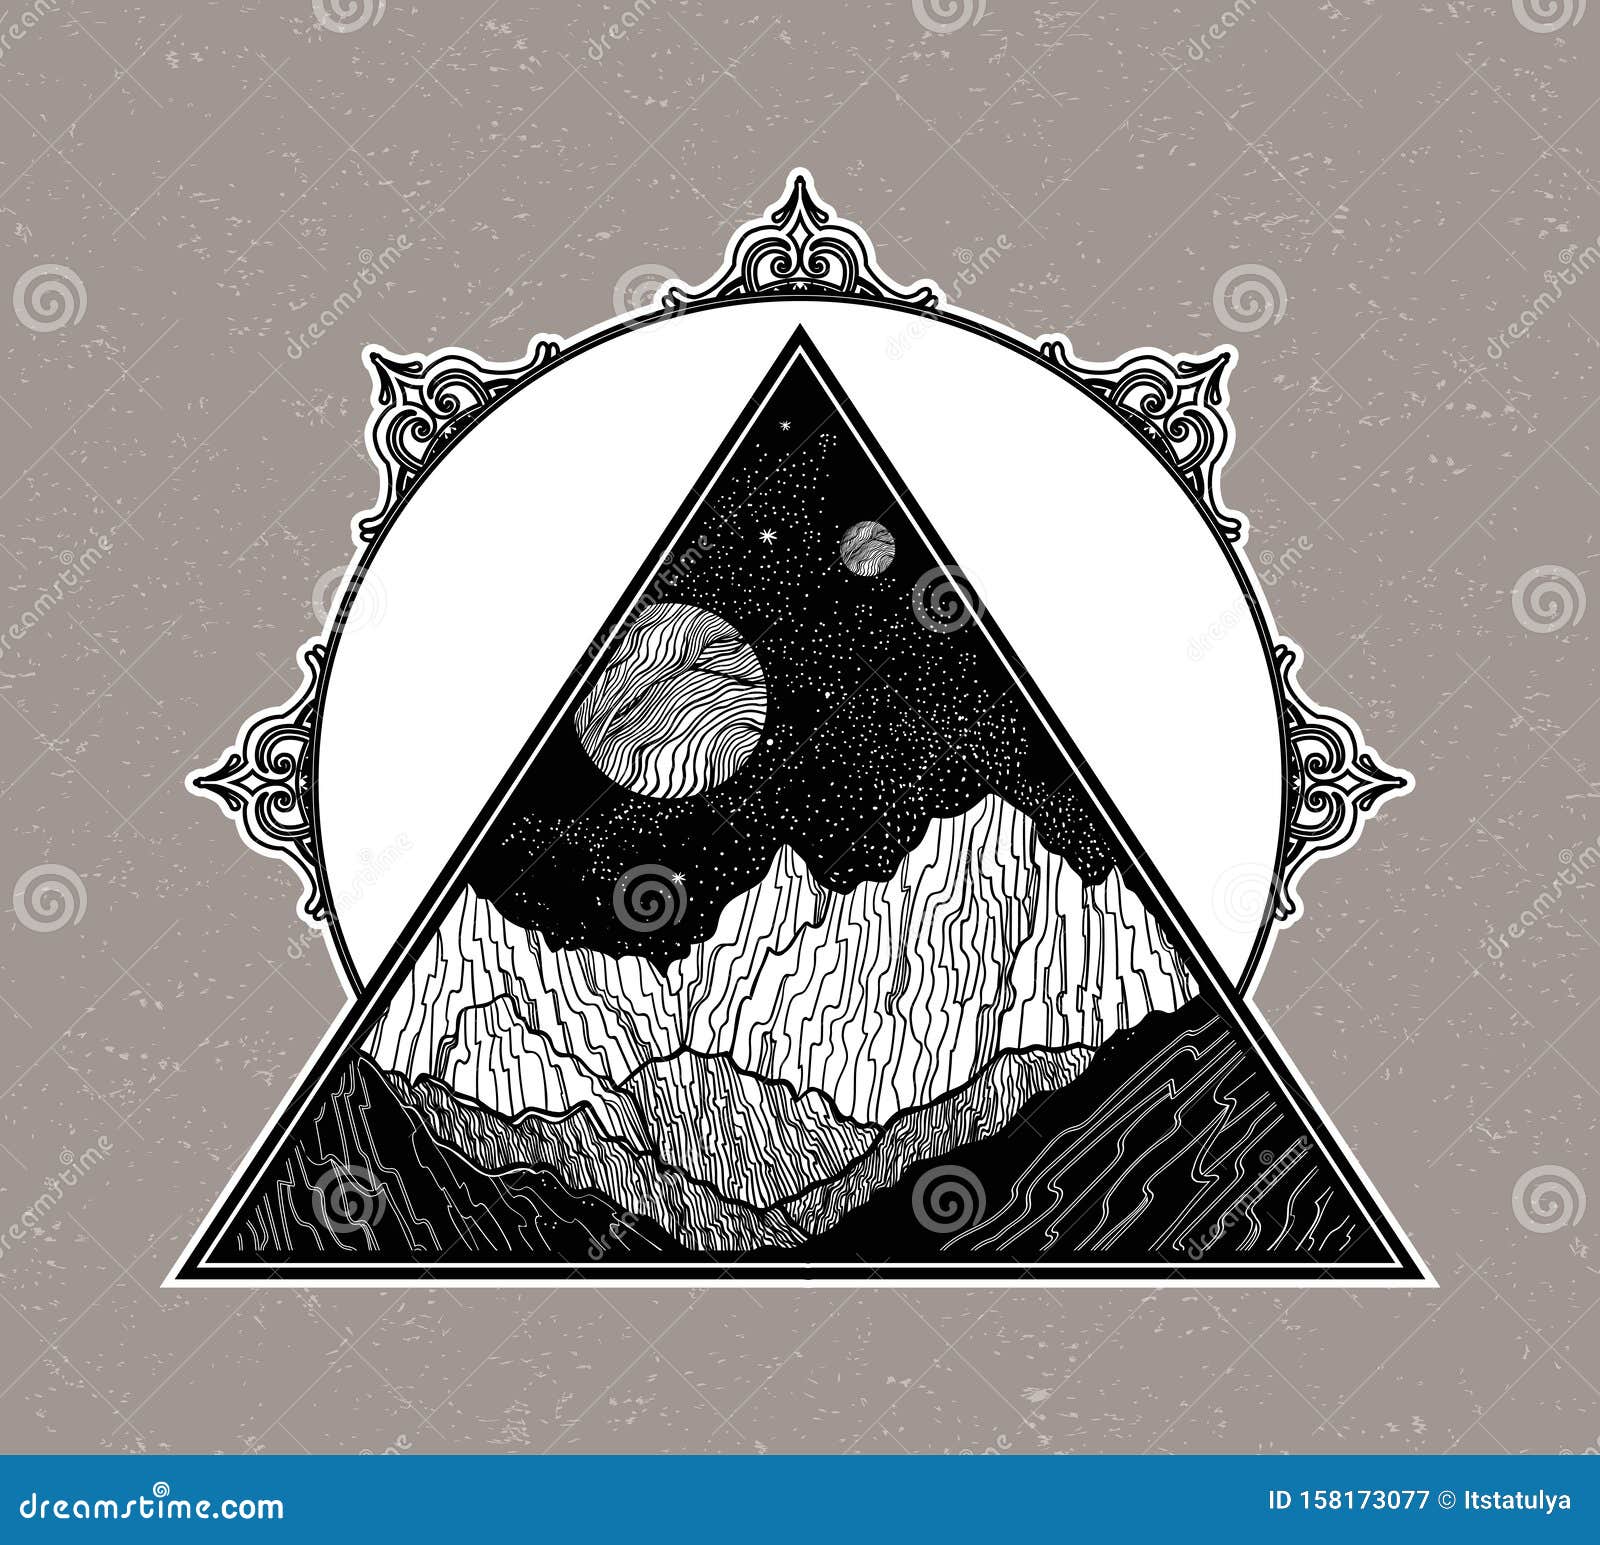 Night Sky with Mountains Landscape in the Shape of a Triangle. Isolated  Vintage Vector Illustration. Invitation Stock Vector - Illustration of  panorama, concept: 158173077